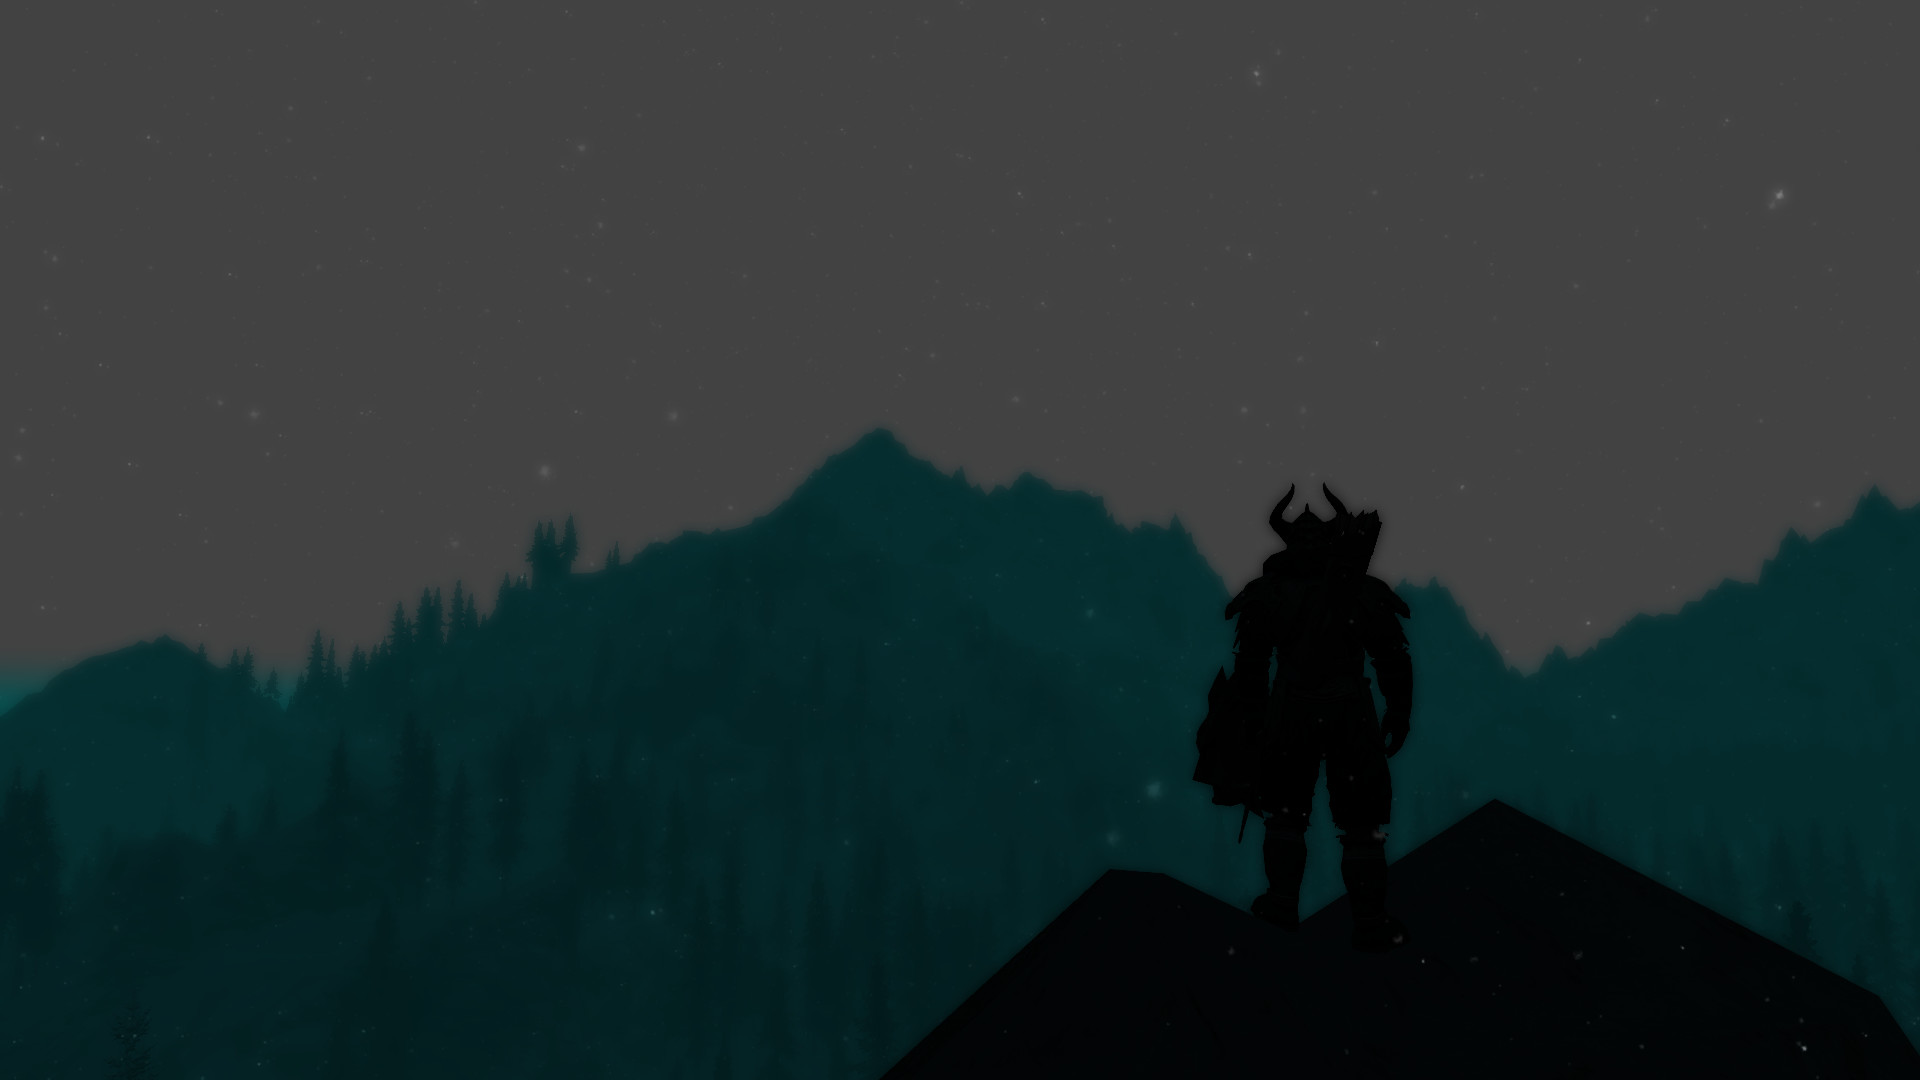 1920x1080 In fact, I like it so much that I want to share the source.  https://www.reddit.com/r/skyrim /comments/2v5829/a_dark_minimalistic_skyrim_background_i_made/